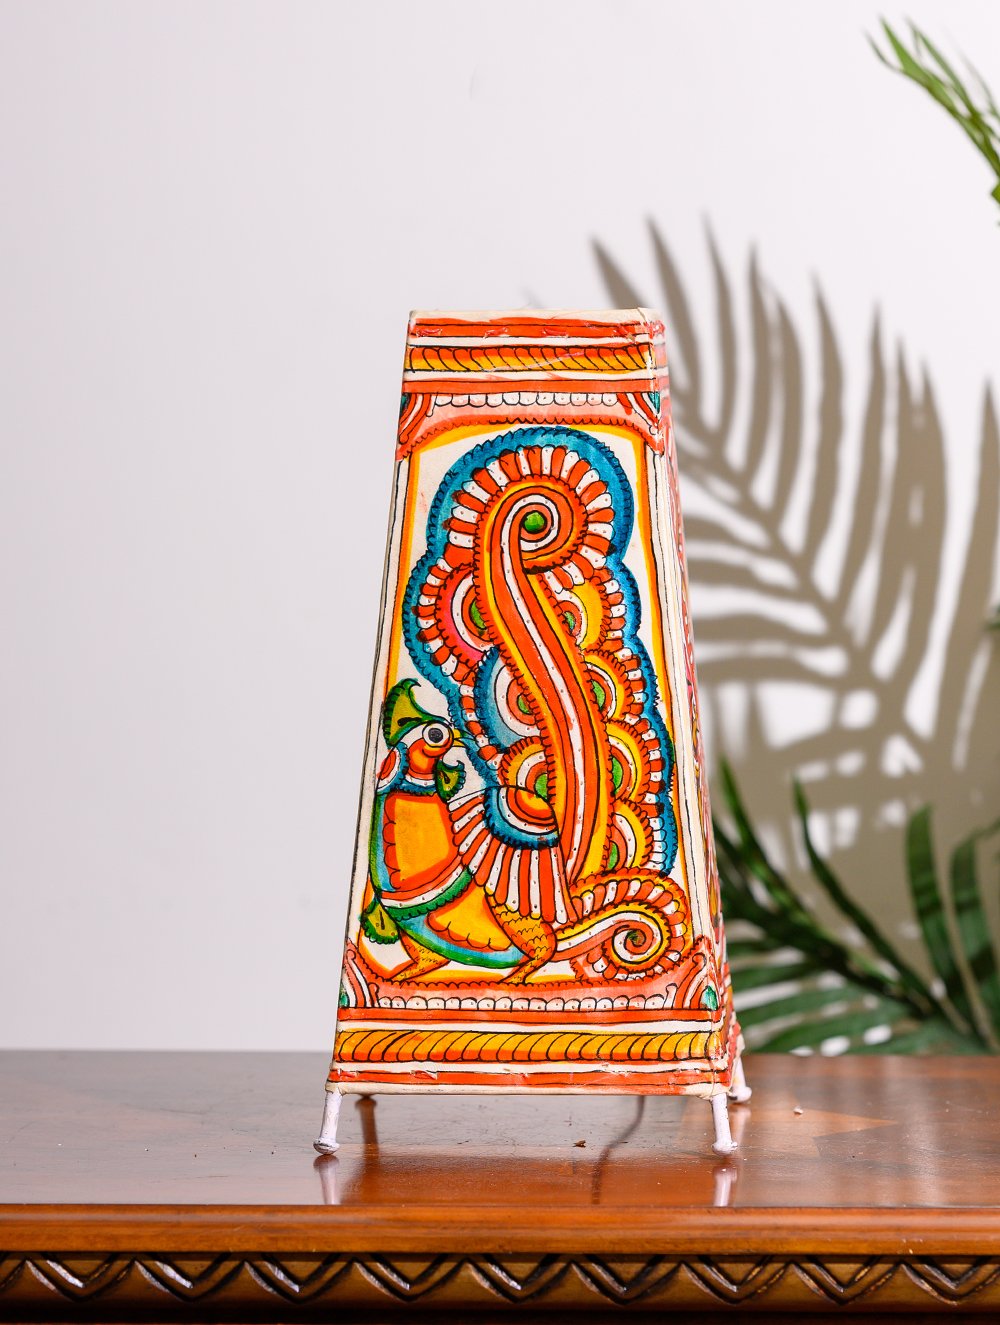 Load image into Gallery viewer, Andhra Leather Craft Table Lamp Shade, Medium (13&quot;x 8&quot;) - Square Peacock